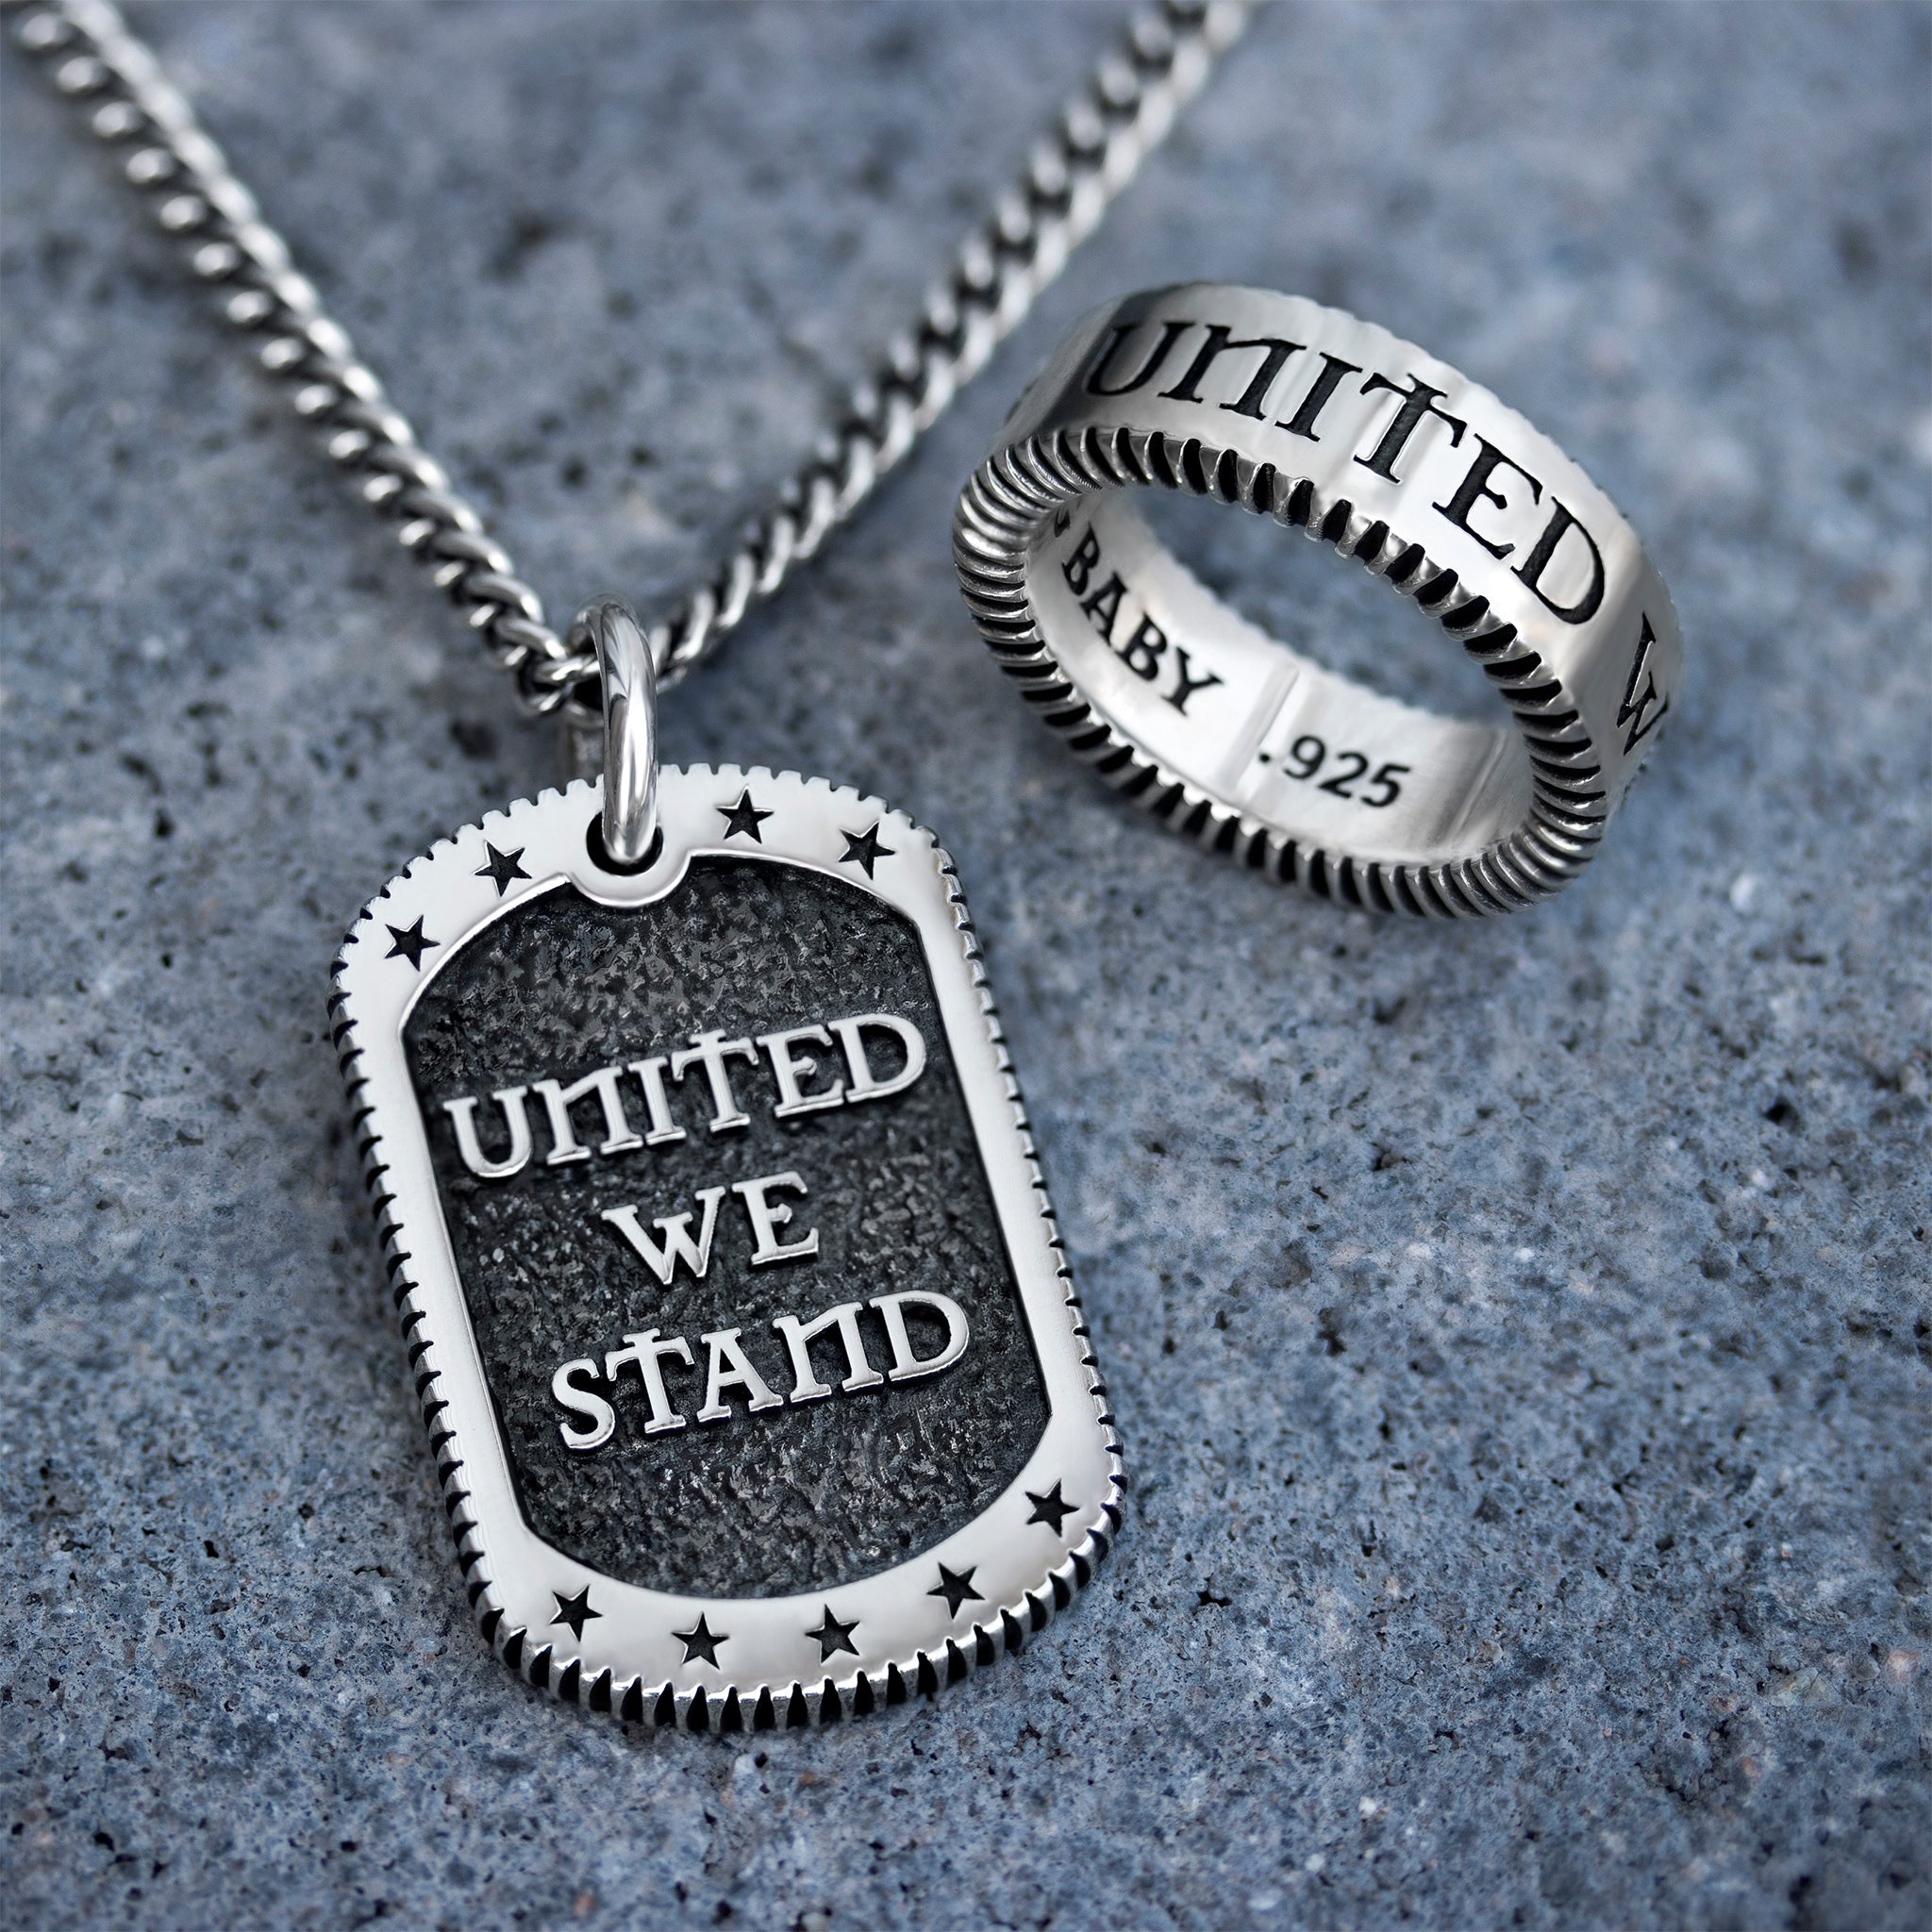 The "United We Stand" Dog Tag Pendant